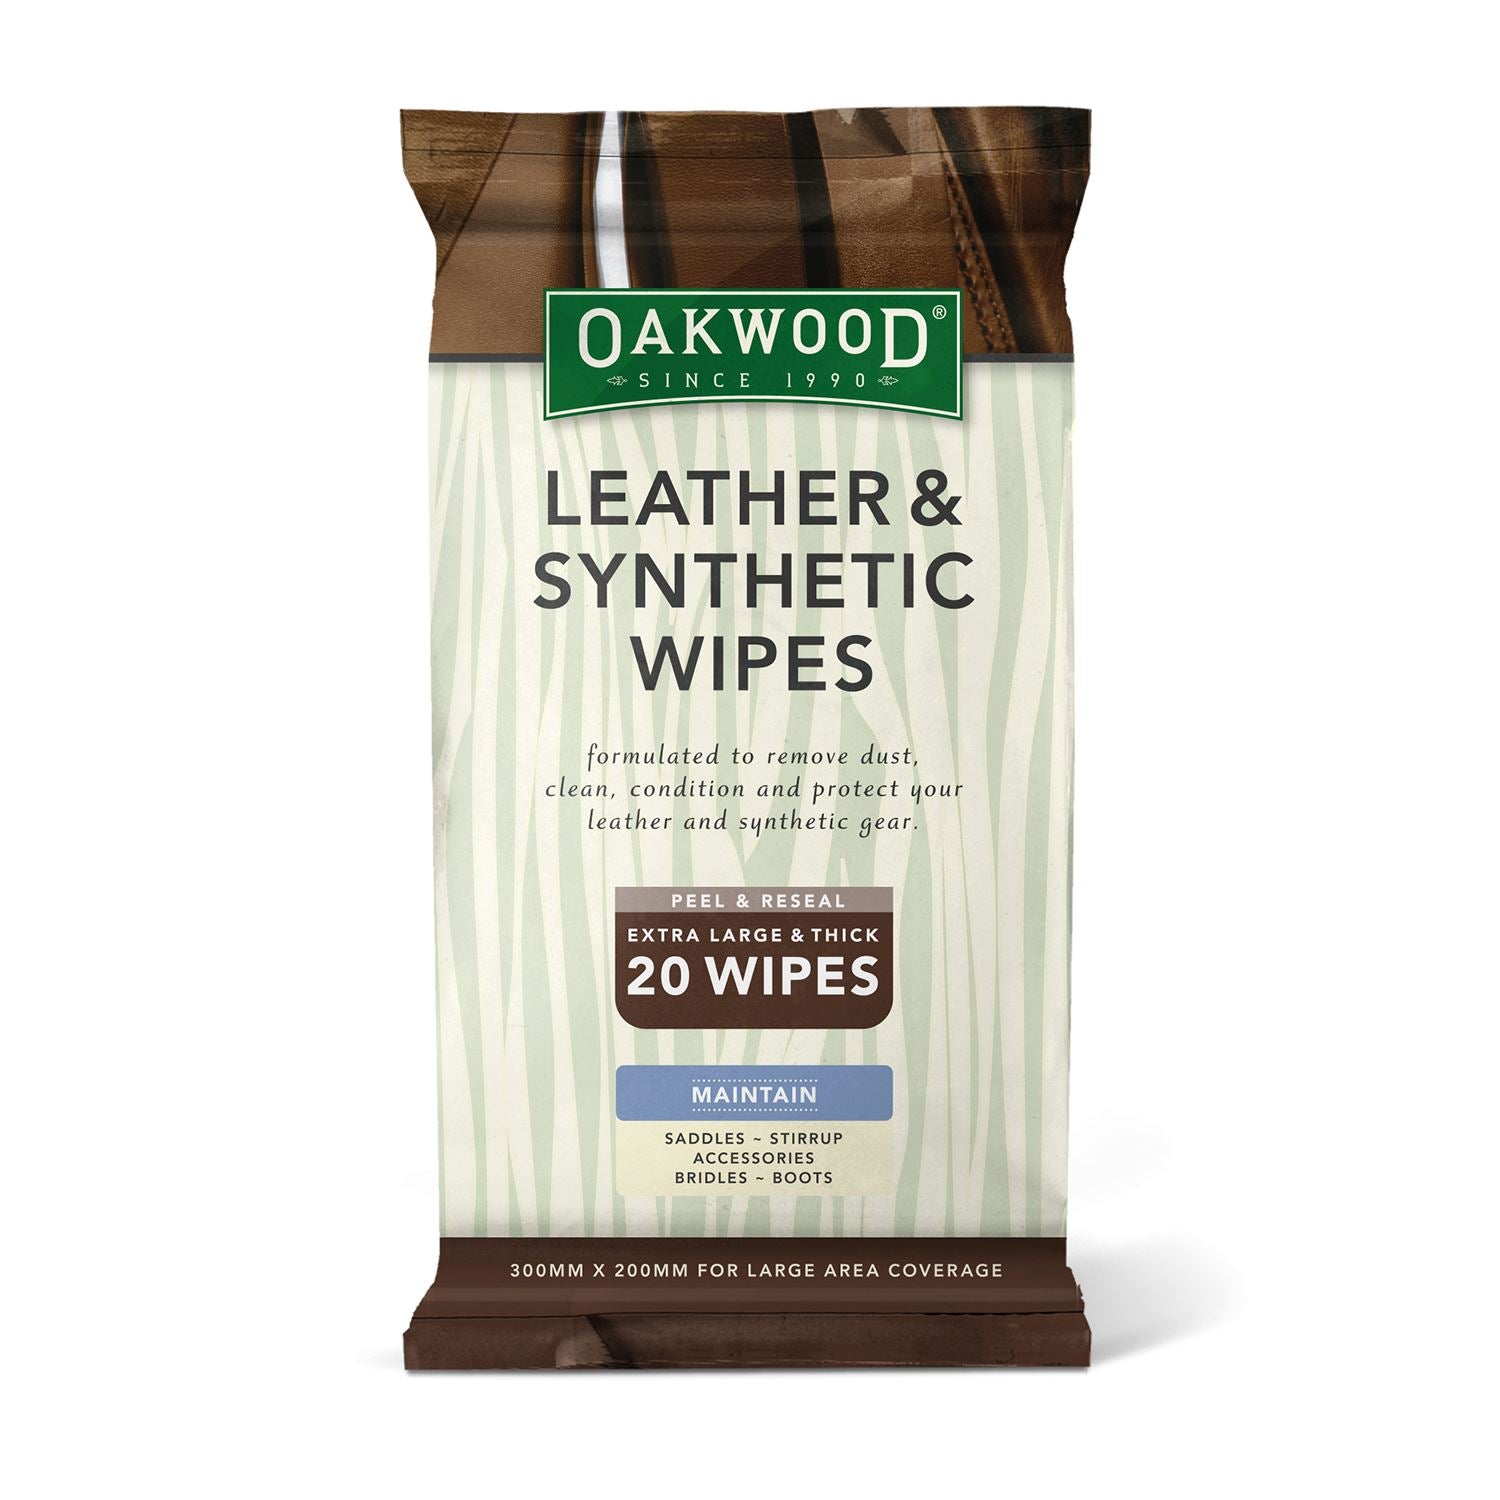 Oakwood Leather & Synthetic Wipes - Just Horse Riders